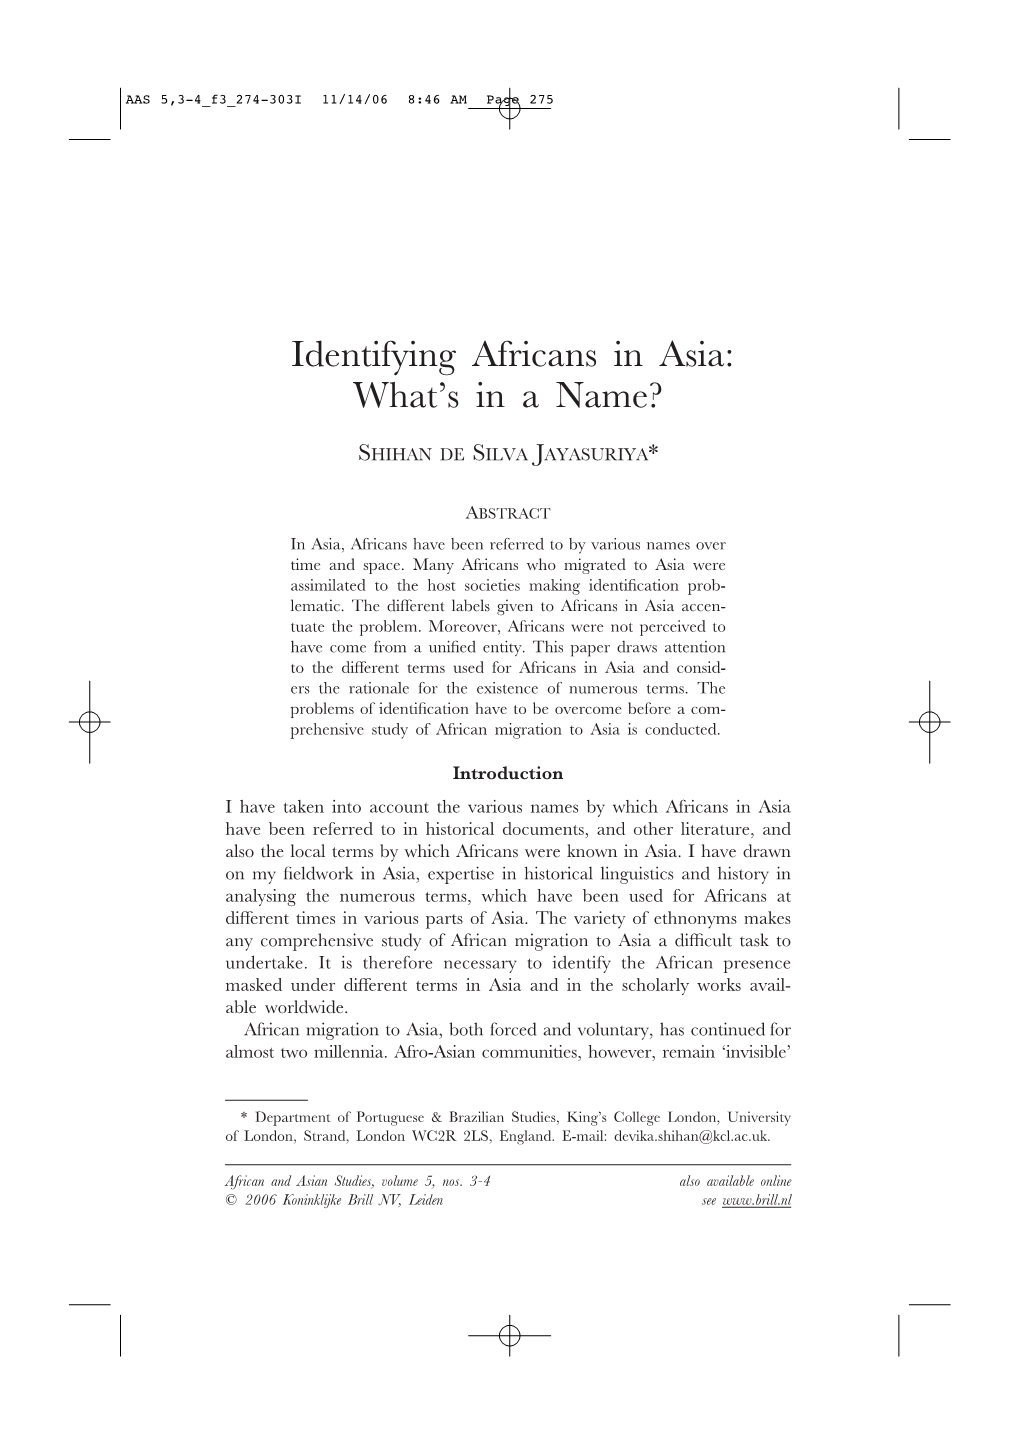 Identifying Africans in Asia: What’S in a Name?